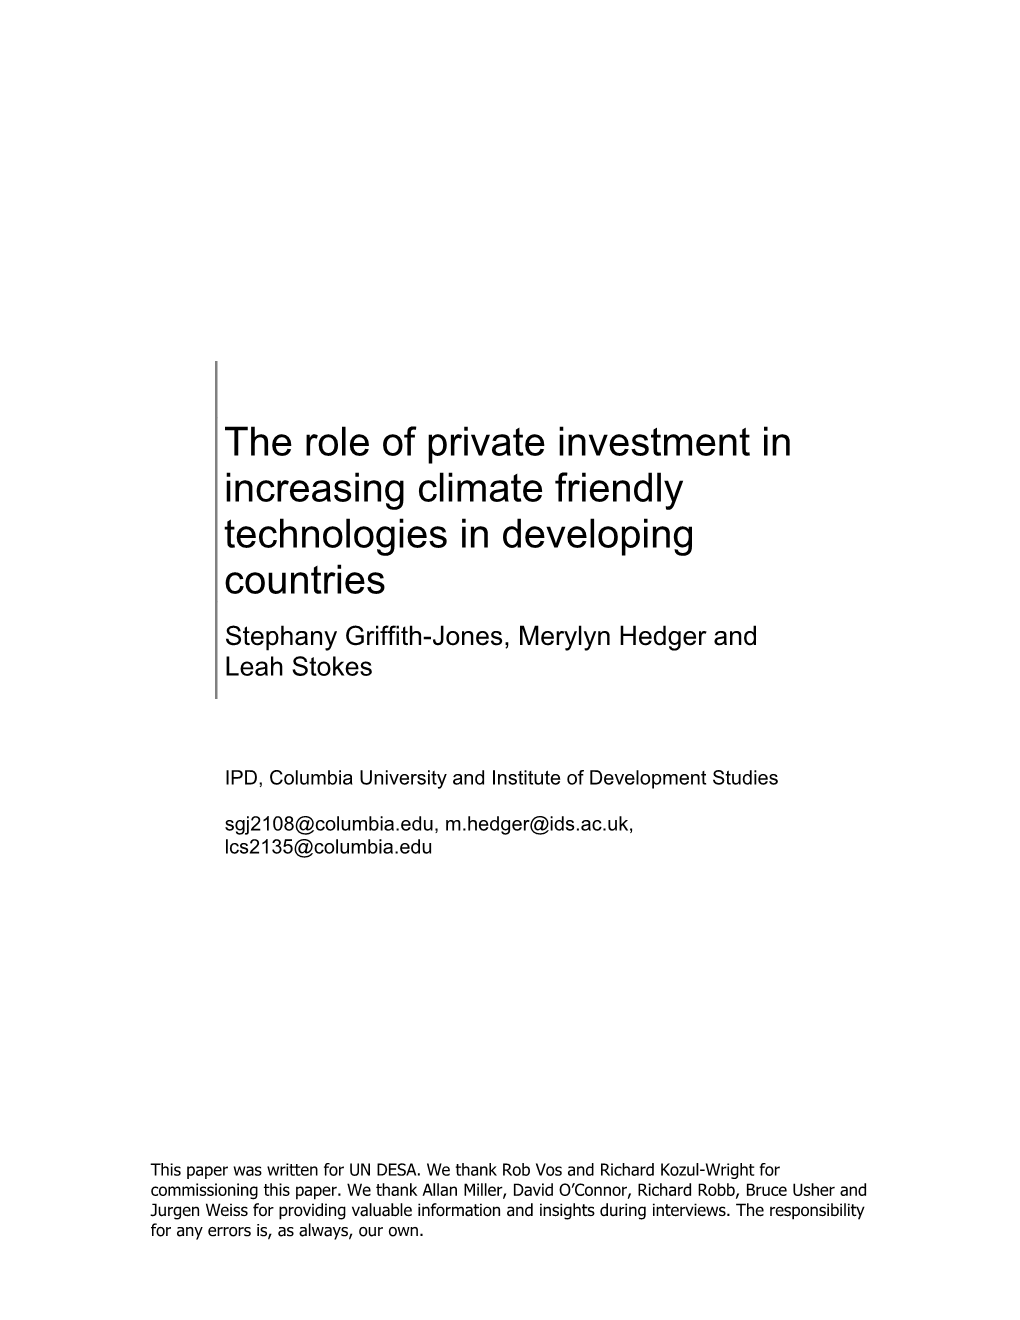 The Role of Private Investment in Increasing Climate Friendly Technologies in Developing